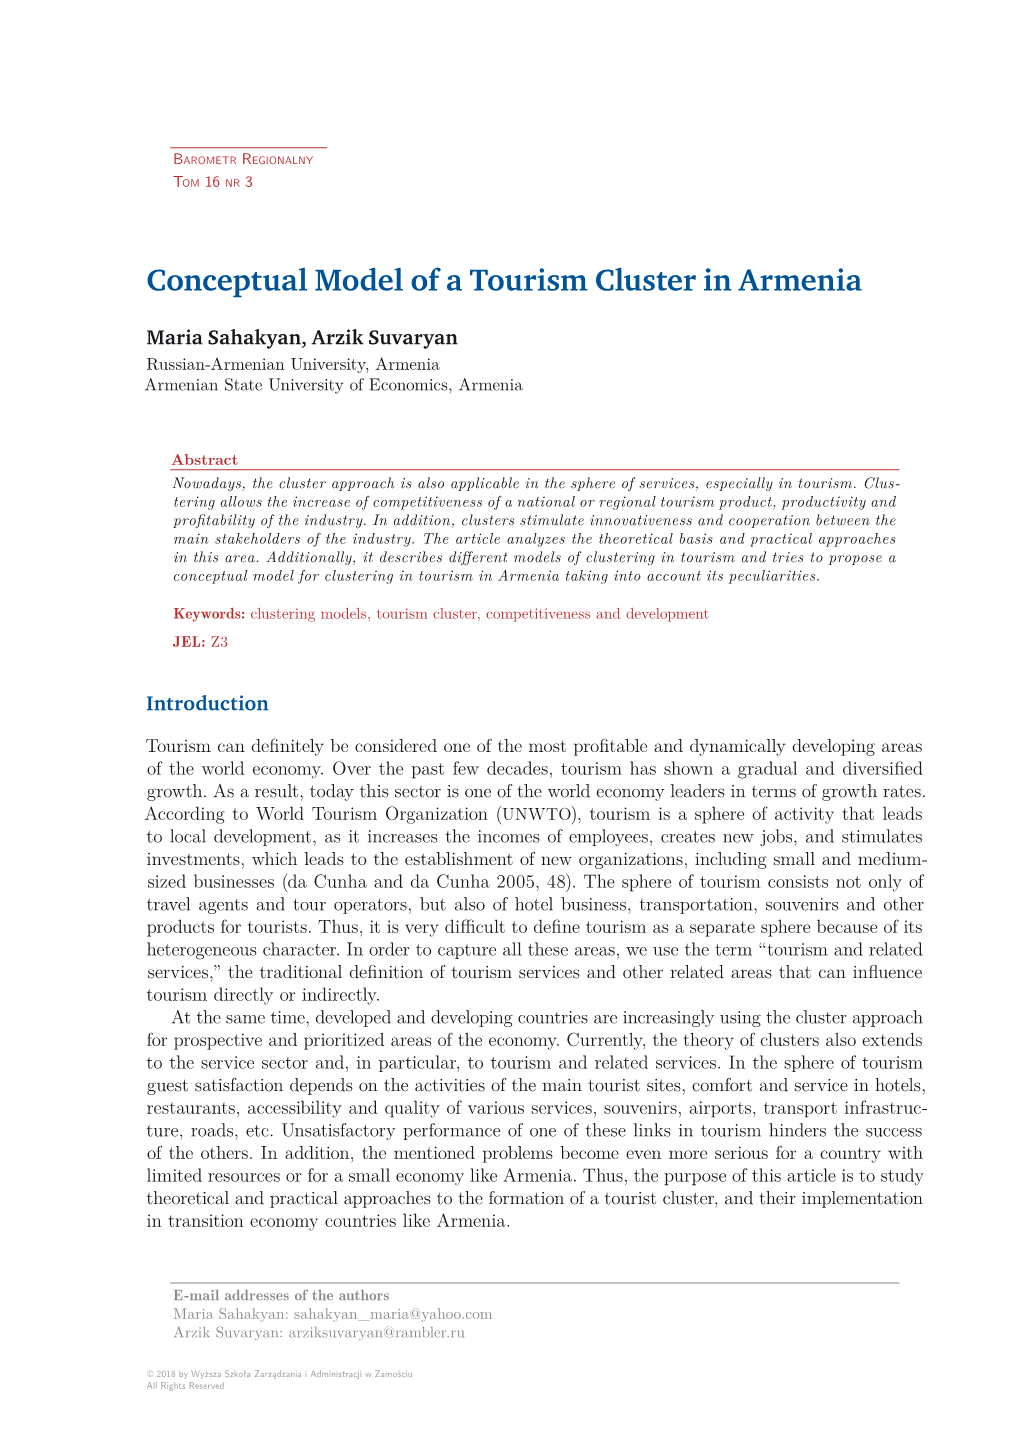 Conceptual Model of a Tourism Cluster in Armenia